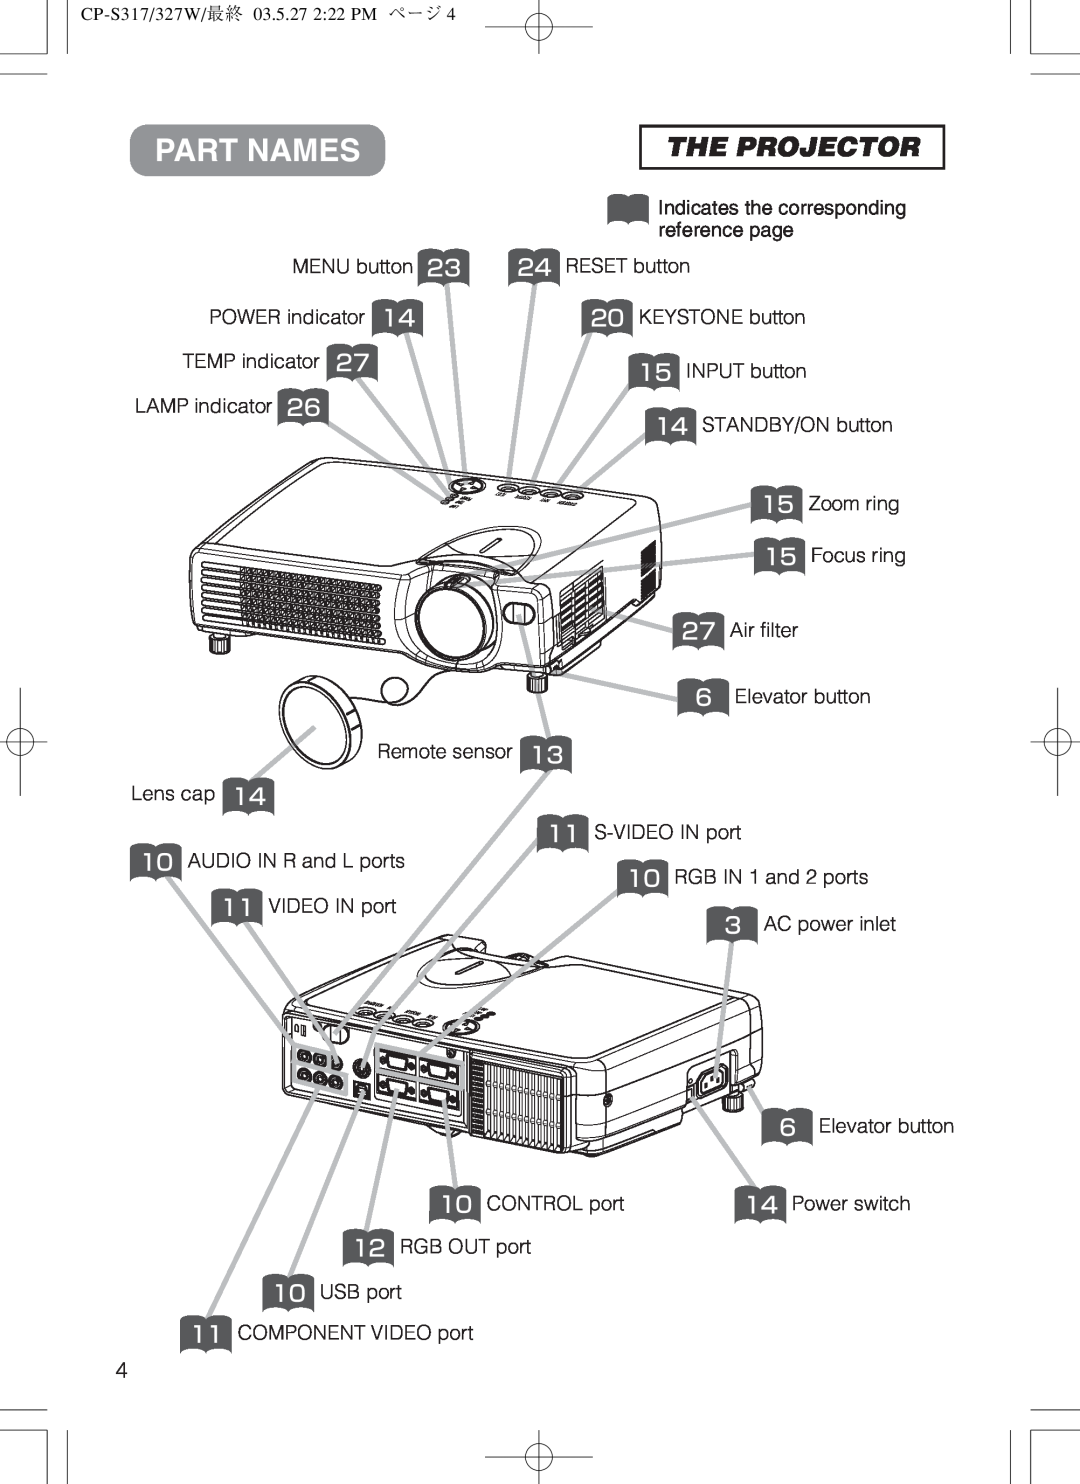 Hitachi cp-s318 user manual Part Names, The Projector 